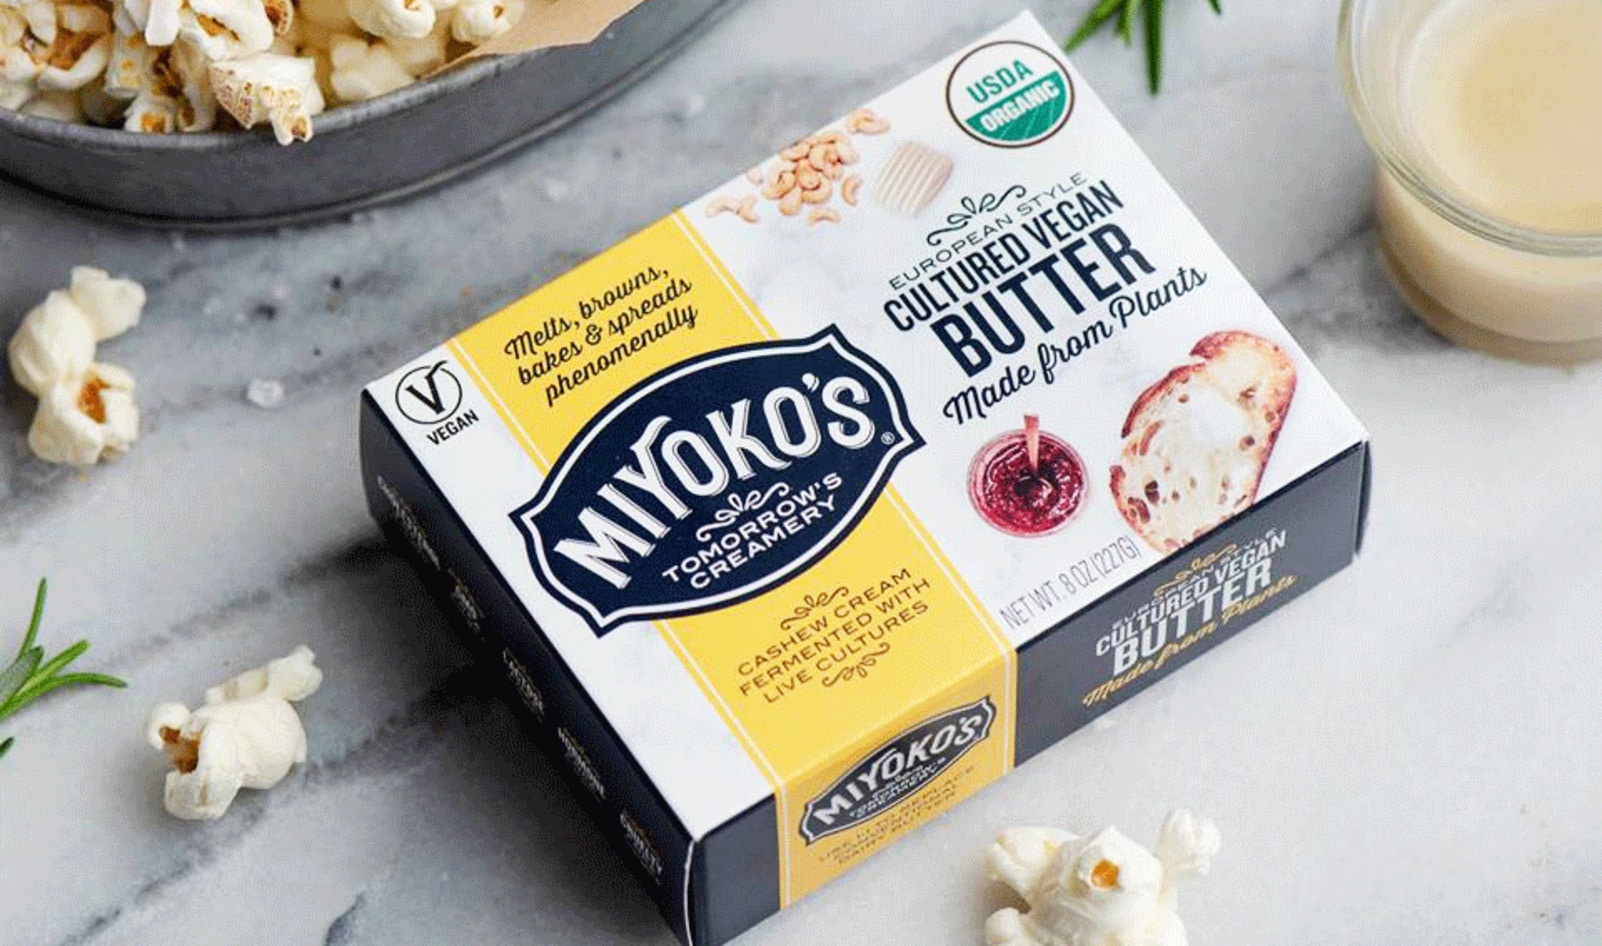 Wisconsin’s Department of Agriculture Orders Removal of Miyoko’s Vegan Butter From Store Shelves